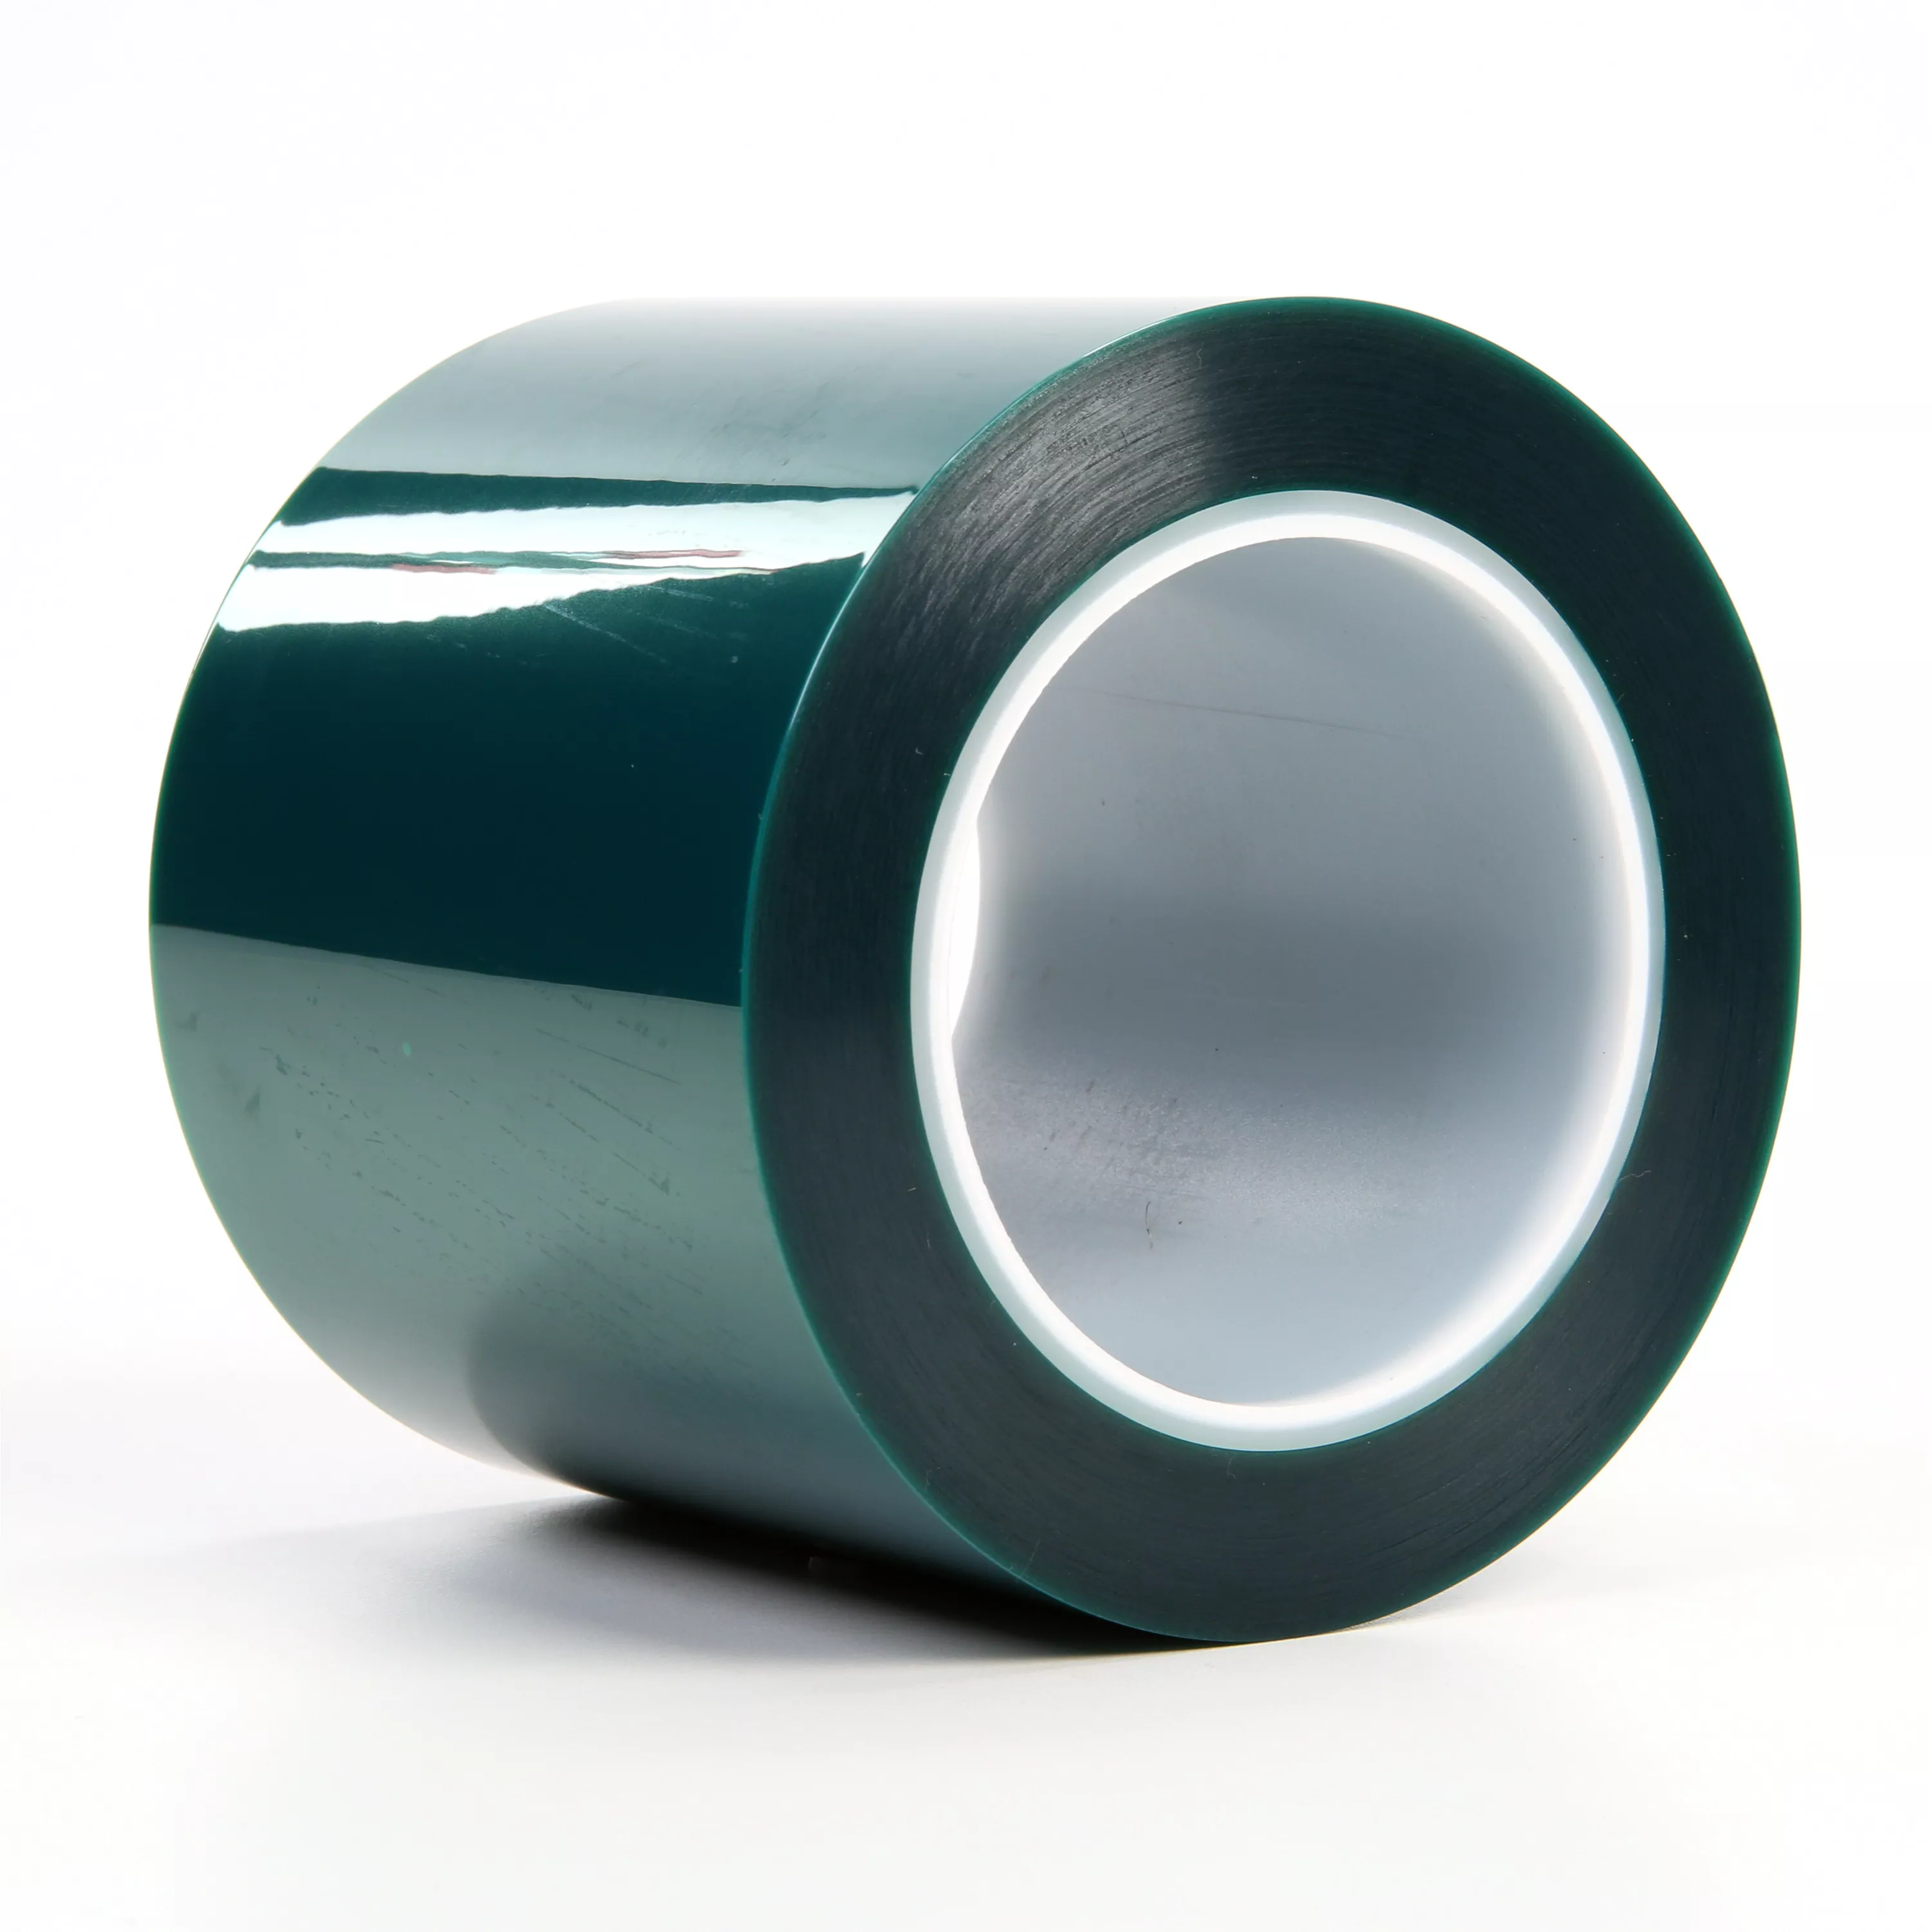 3M™ Polyester Tape 8992, Green, 4 in x 72 yd, 3.2 mil, 8 Roll/Case